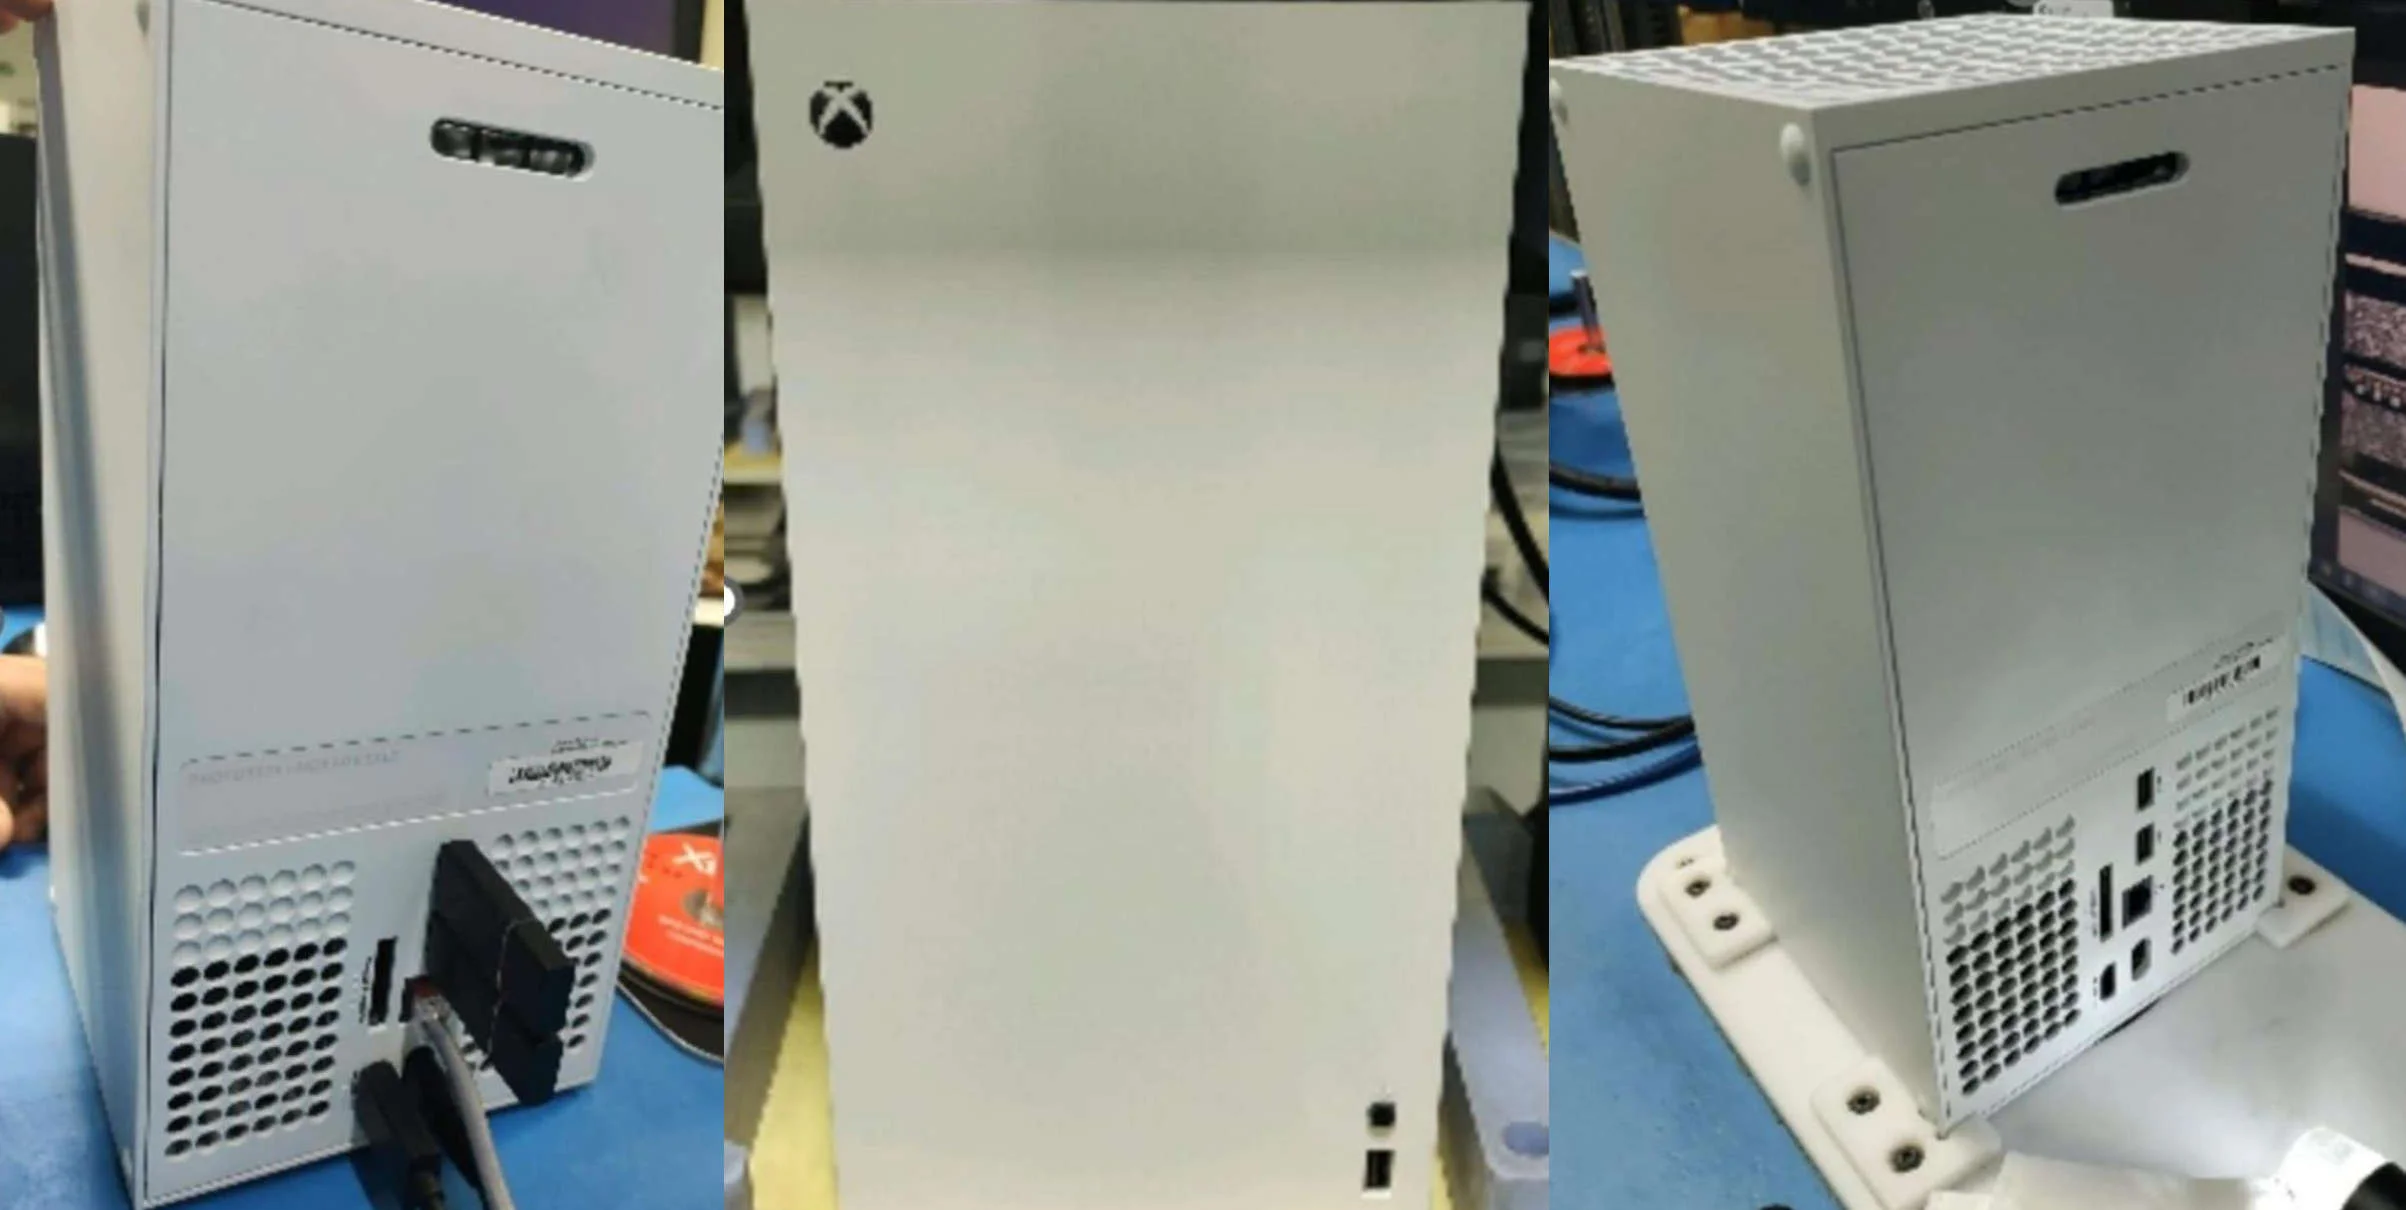 The first photos of the new Xbox Series X model were posted online